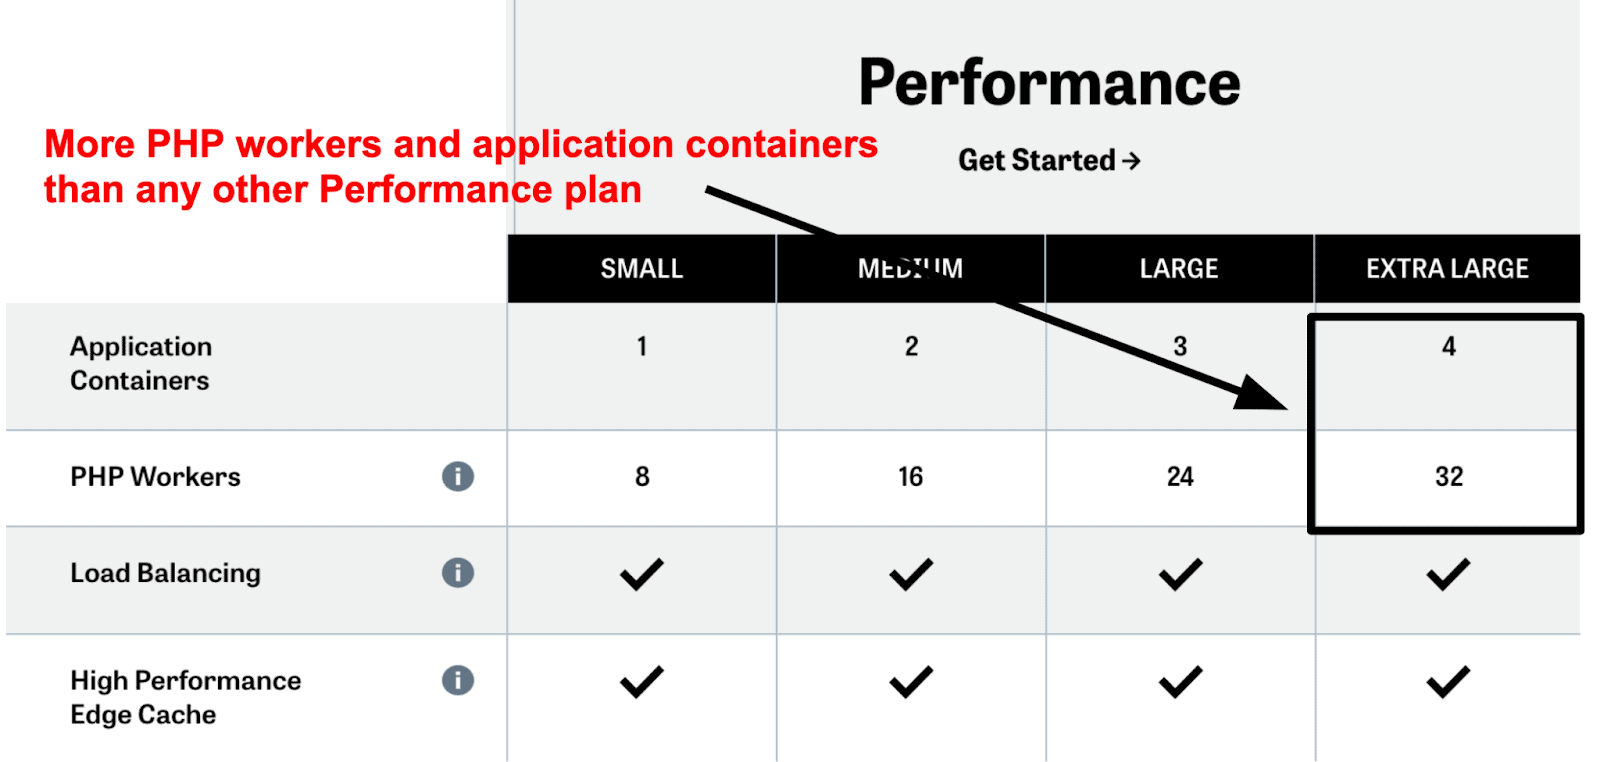 pantheon-performance-extra-large-application-containers-and-php-workers